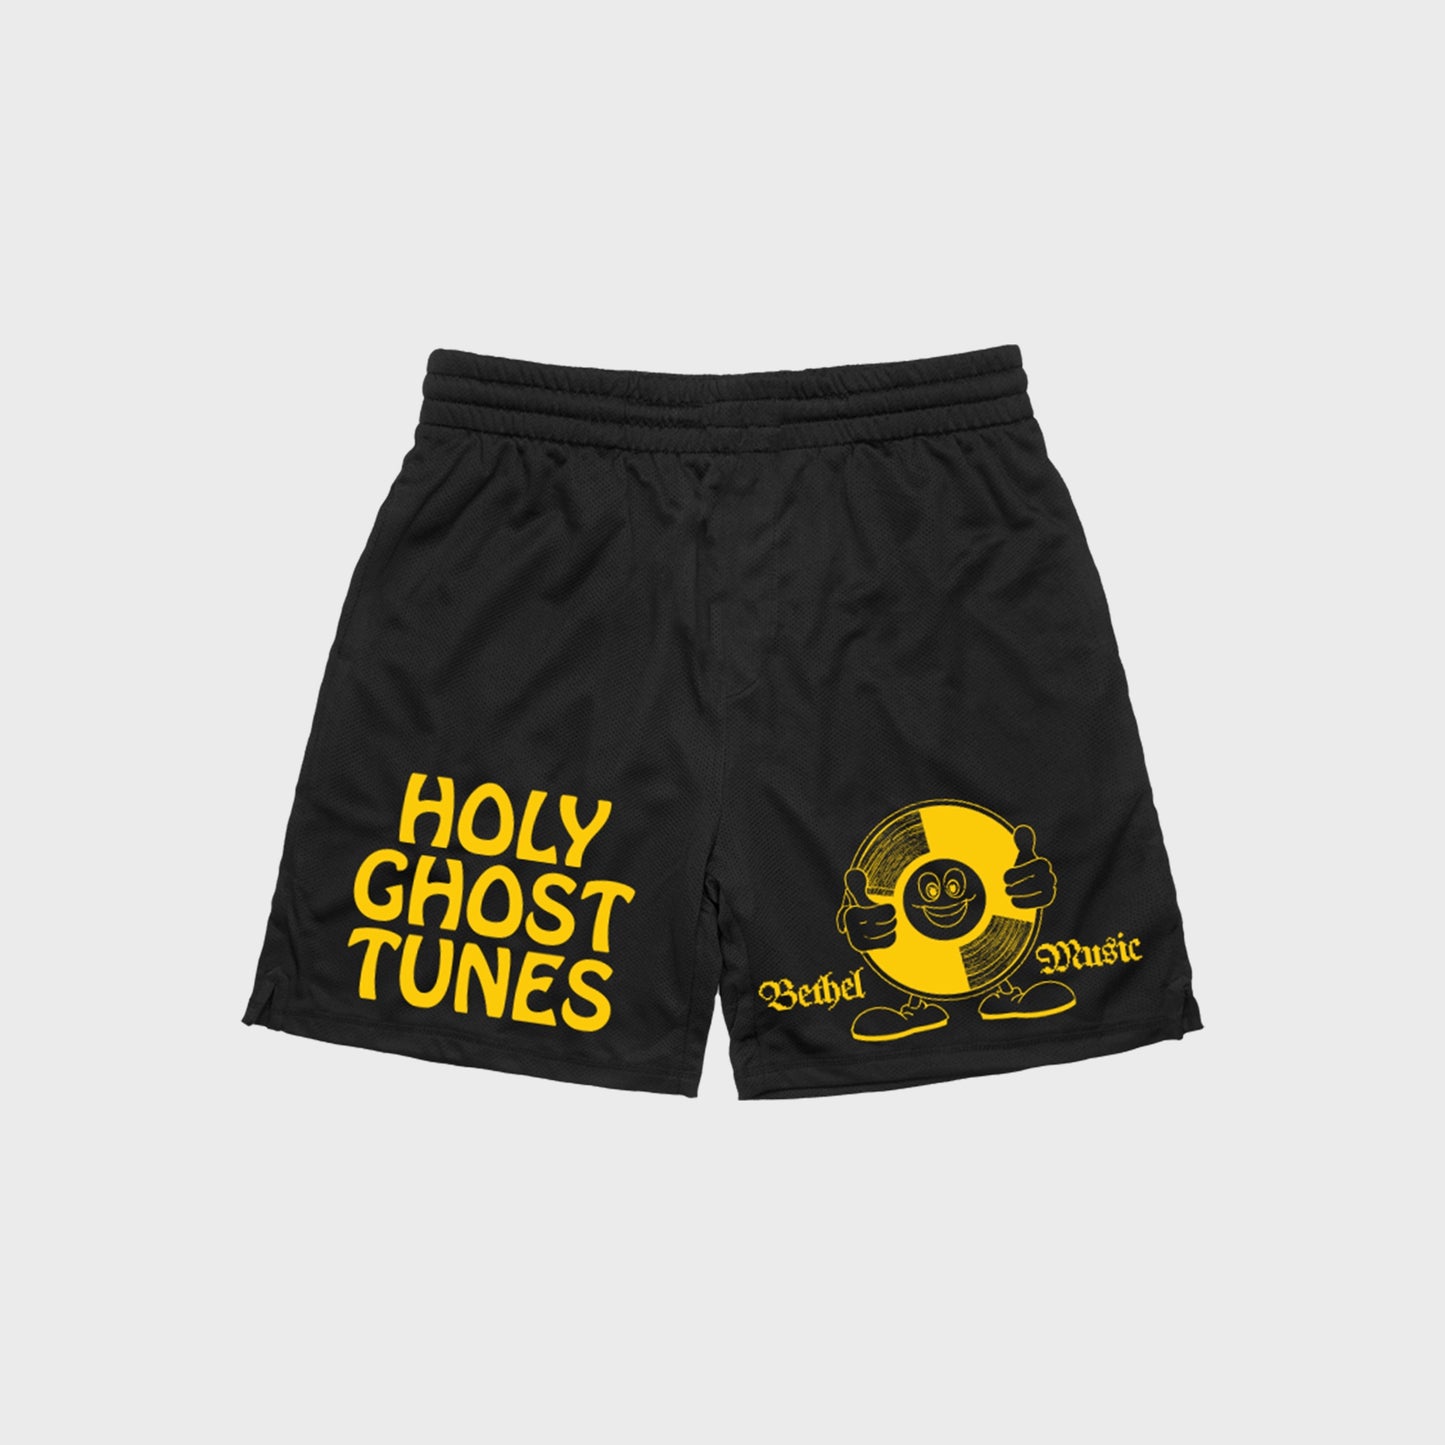 HOLY GHOST TUNES SHORTS